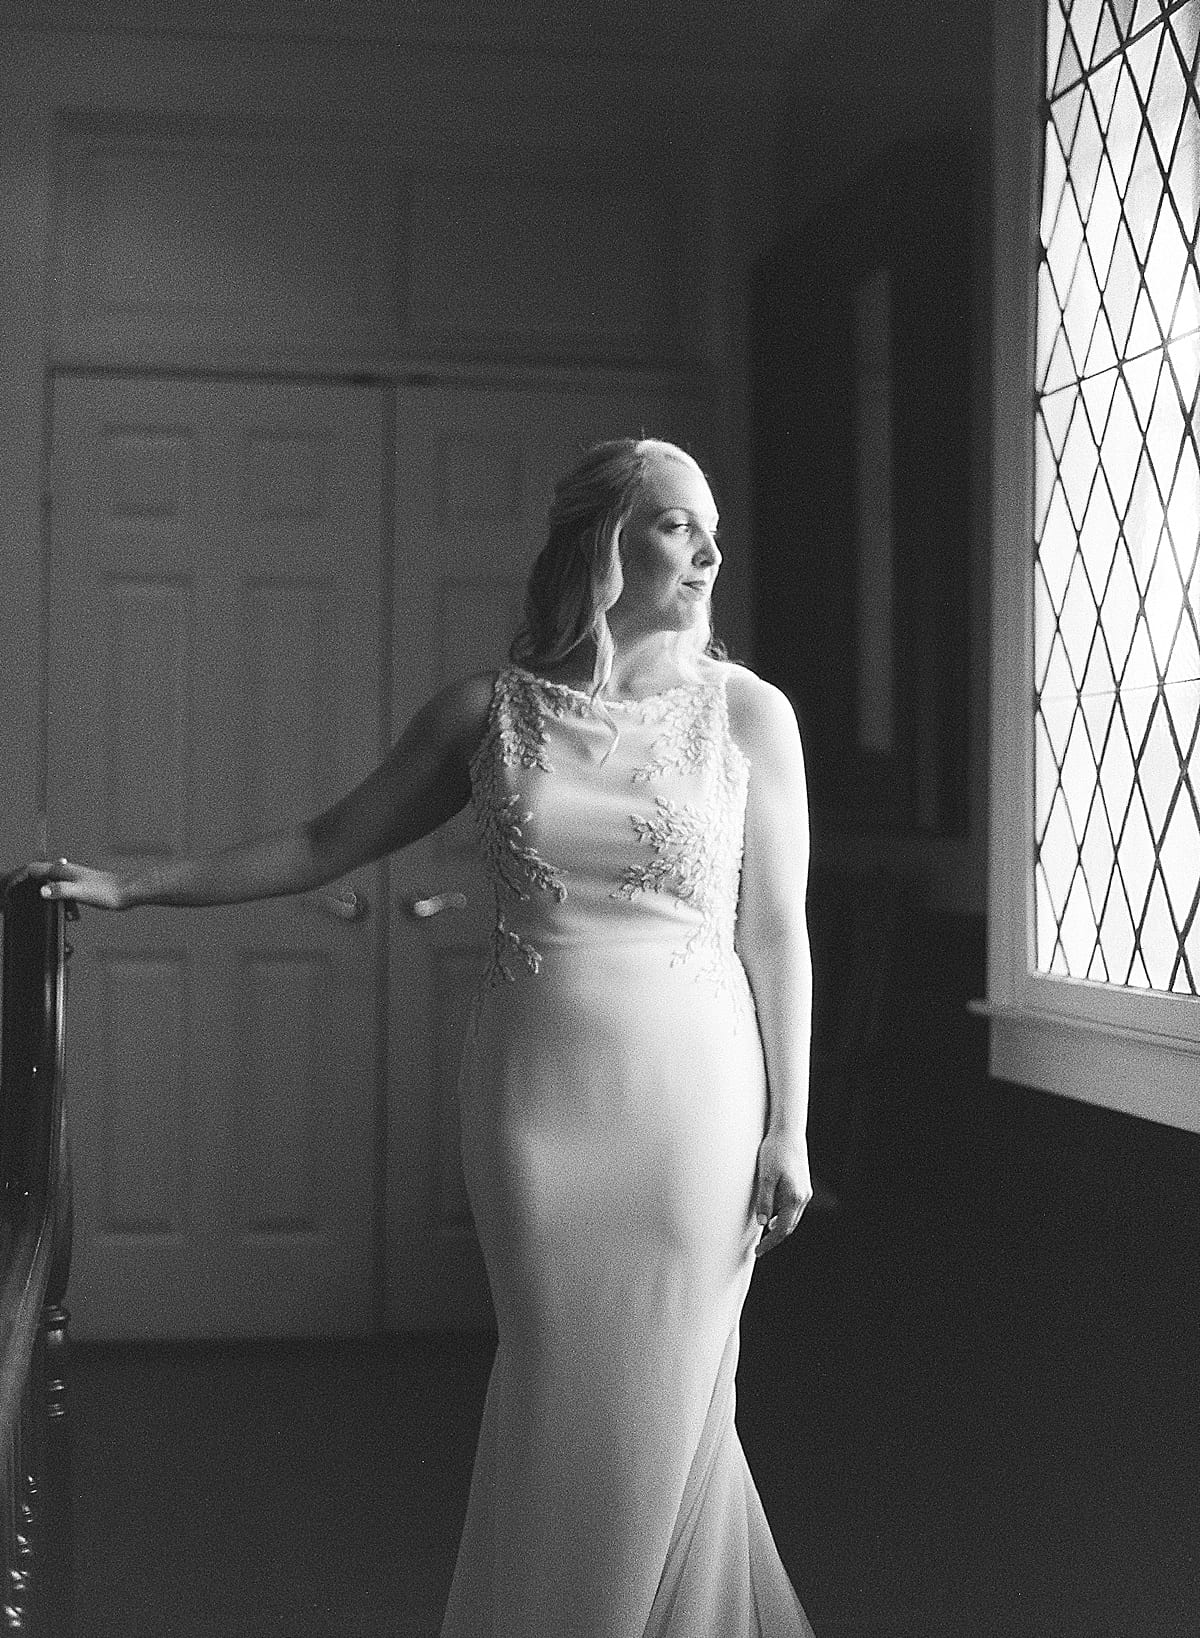 Black and White of Bride Looking Out the Window Photo